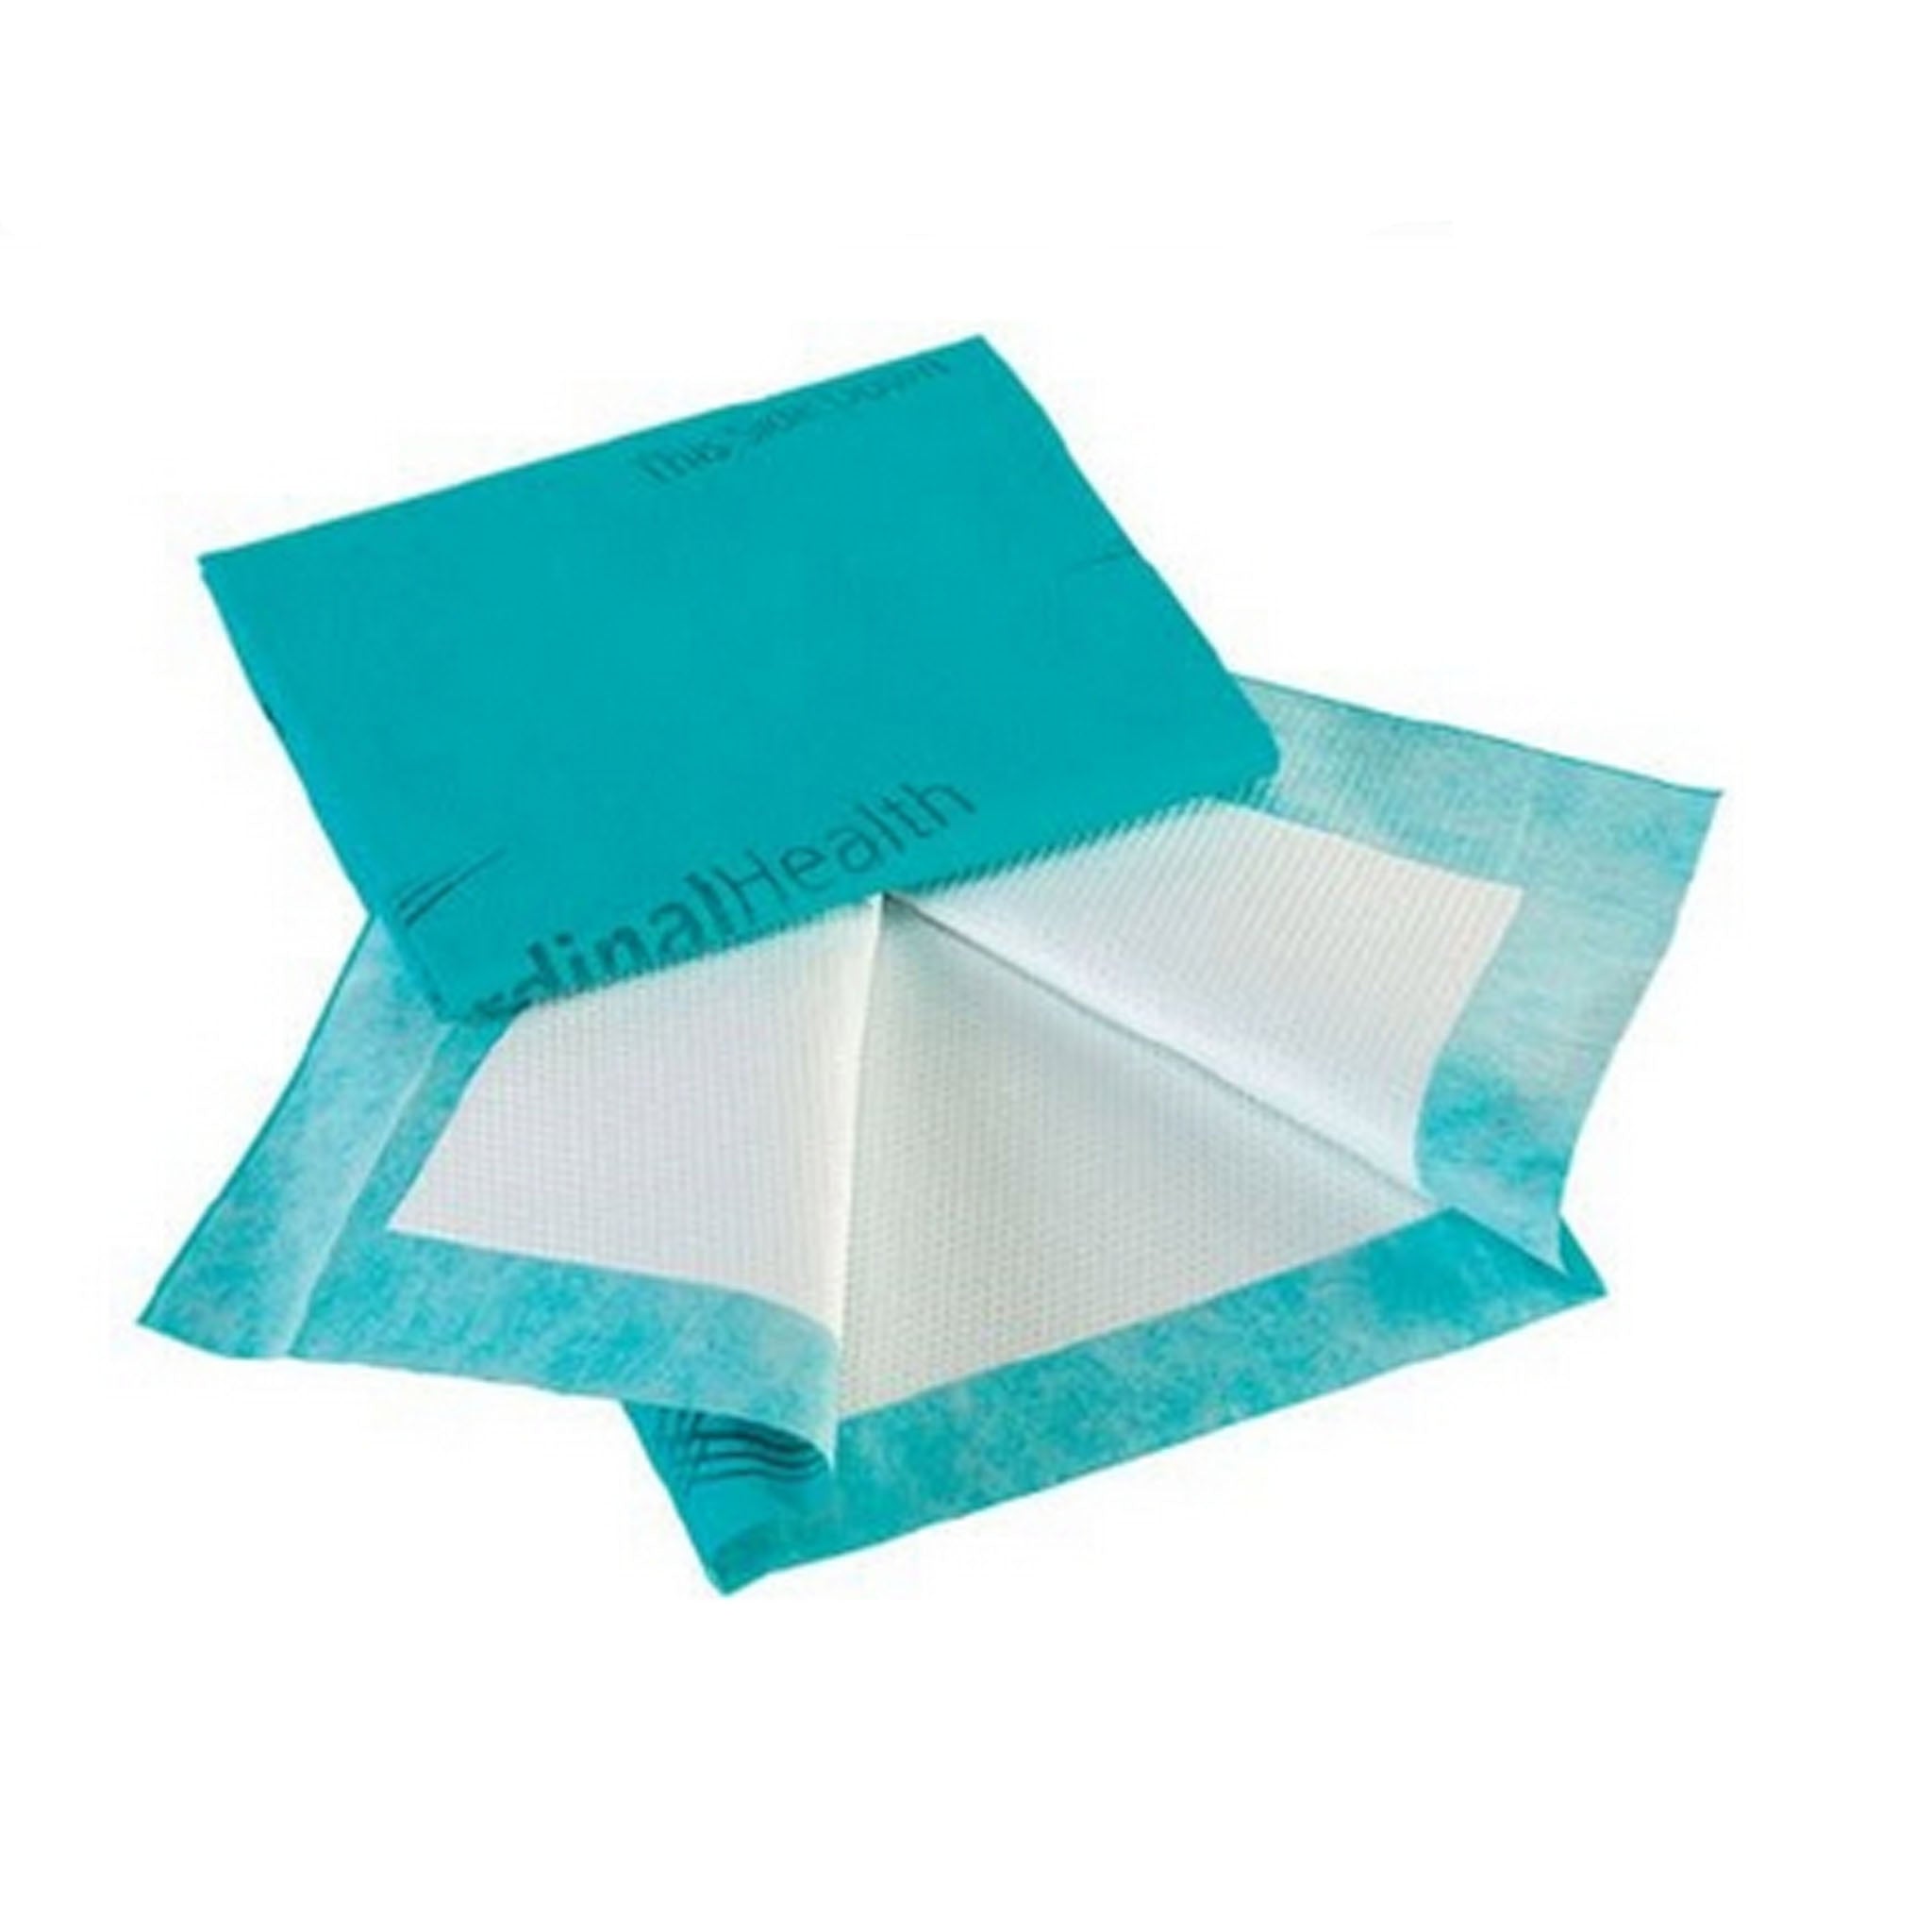 StayDry Heavy Absorbency Disposable Underpad by McKesson